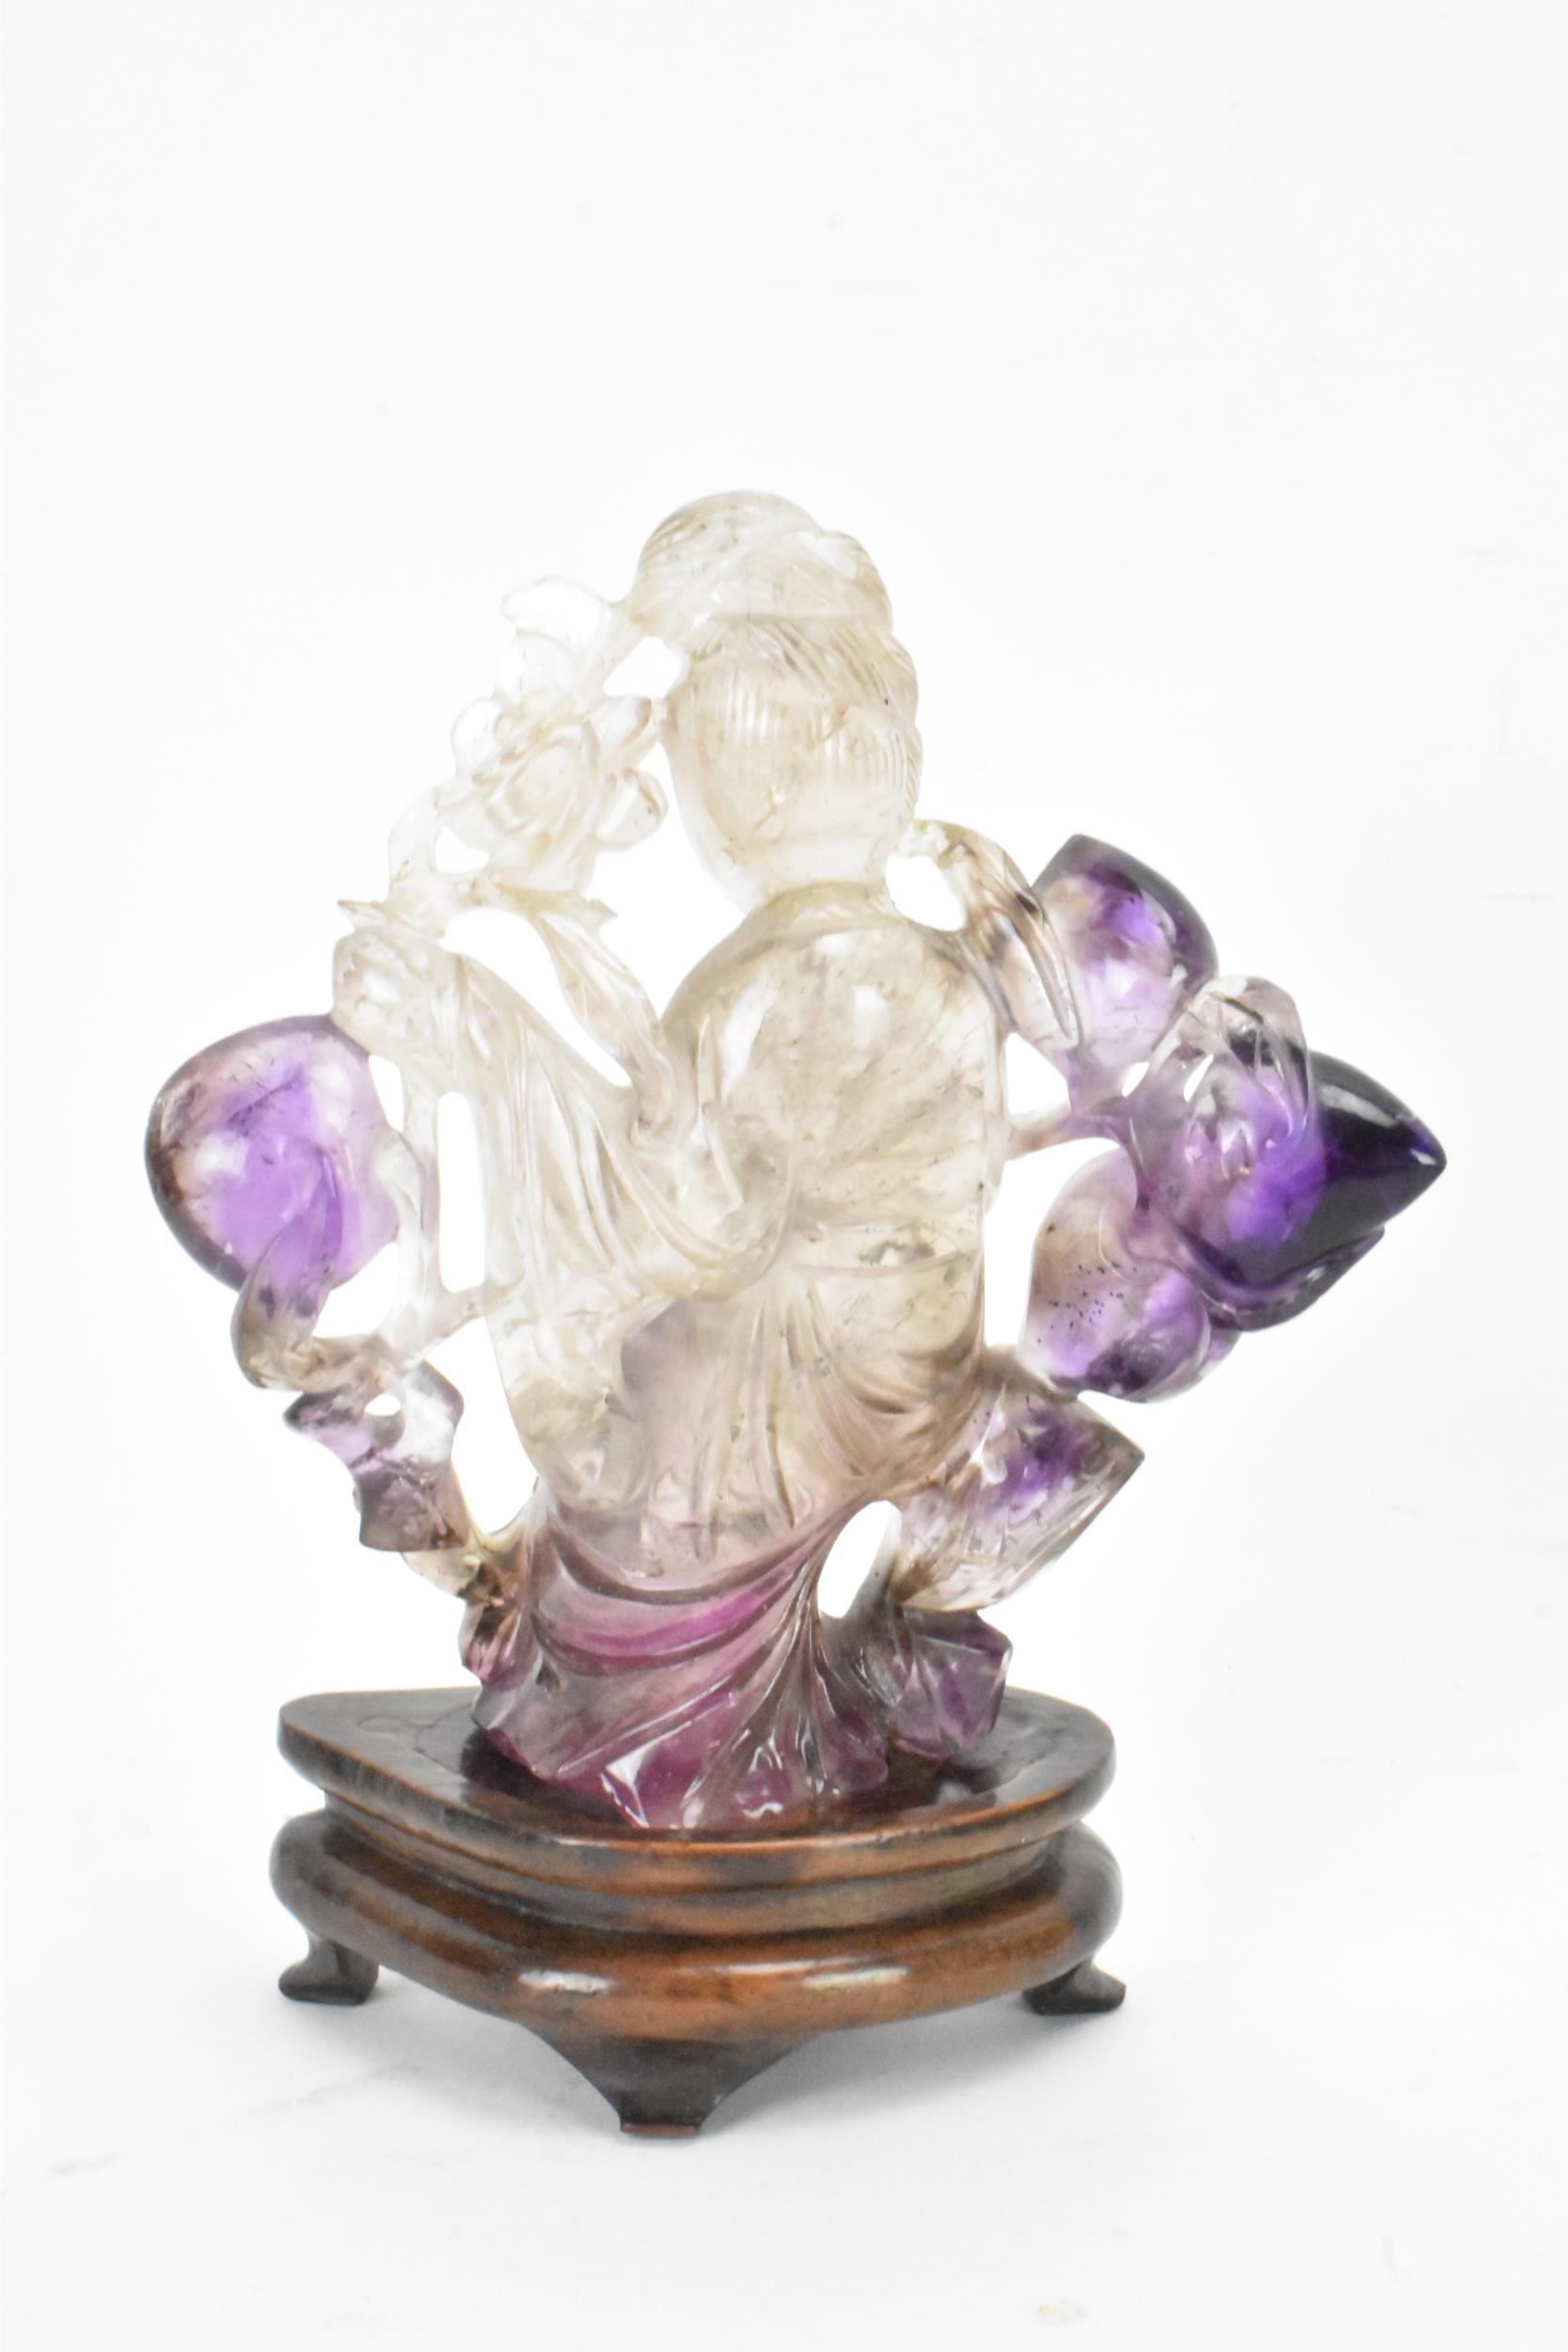 A 20th century Chinese carved amethyst figure of Guanyin, the goddess of mercy, in a seated position - Image 3 of 7